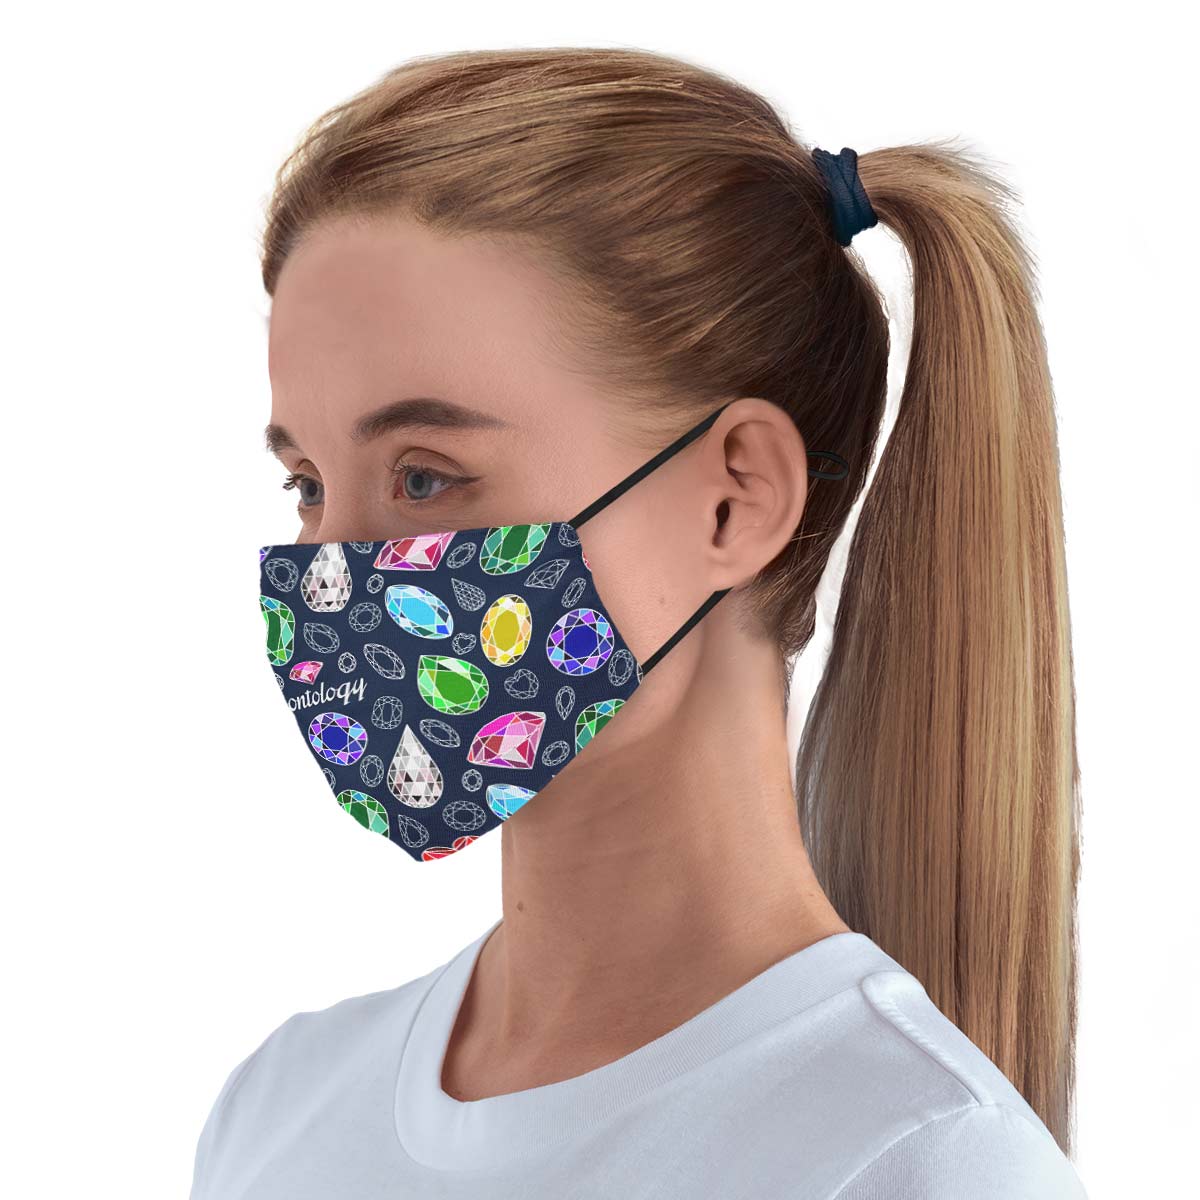 Diamontology Face Cover